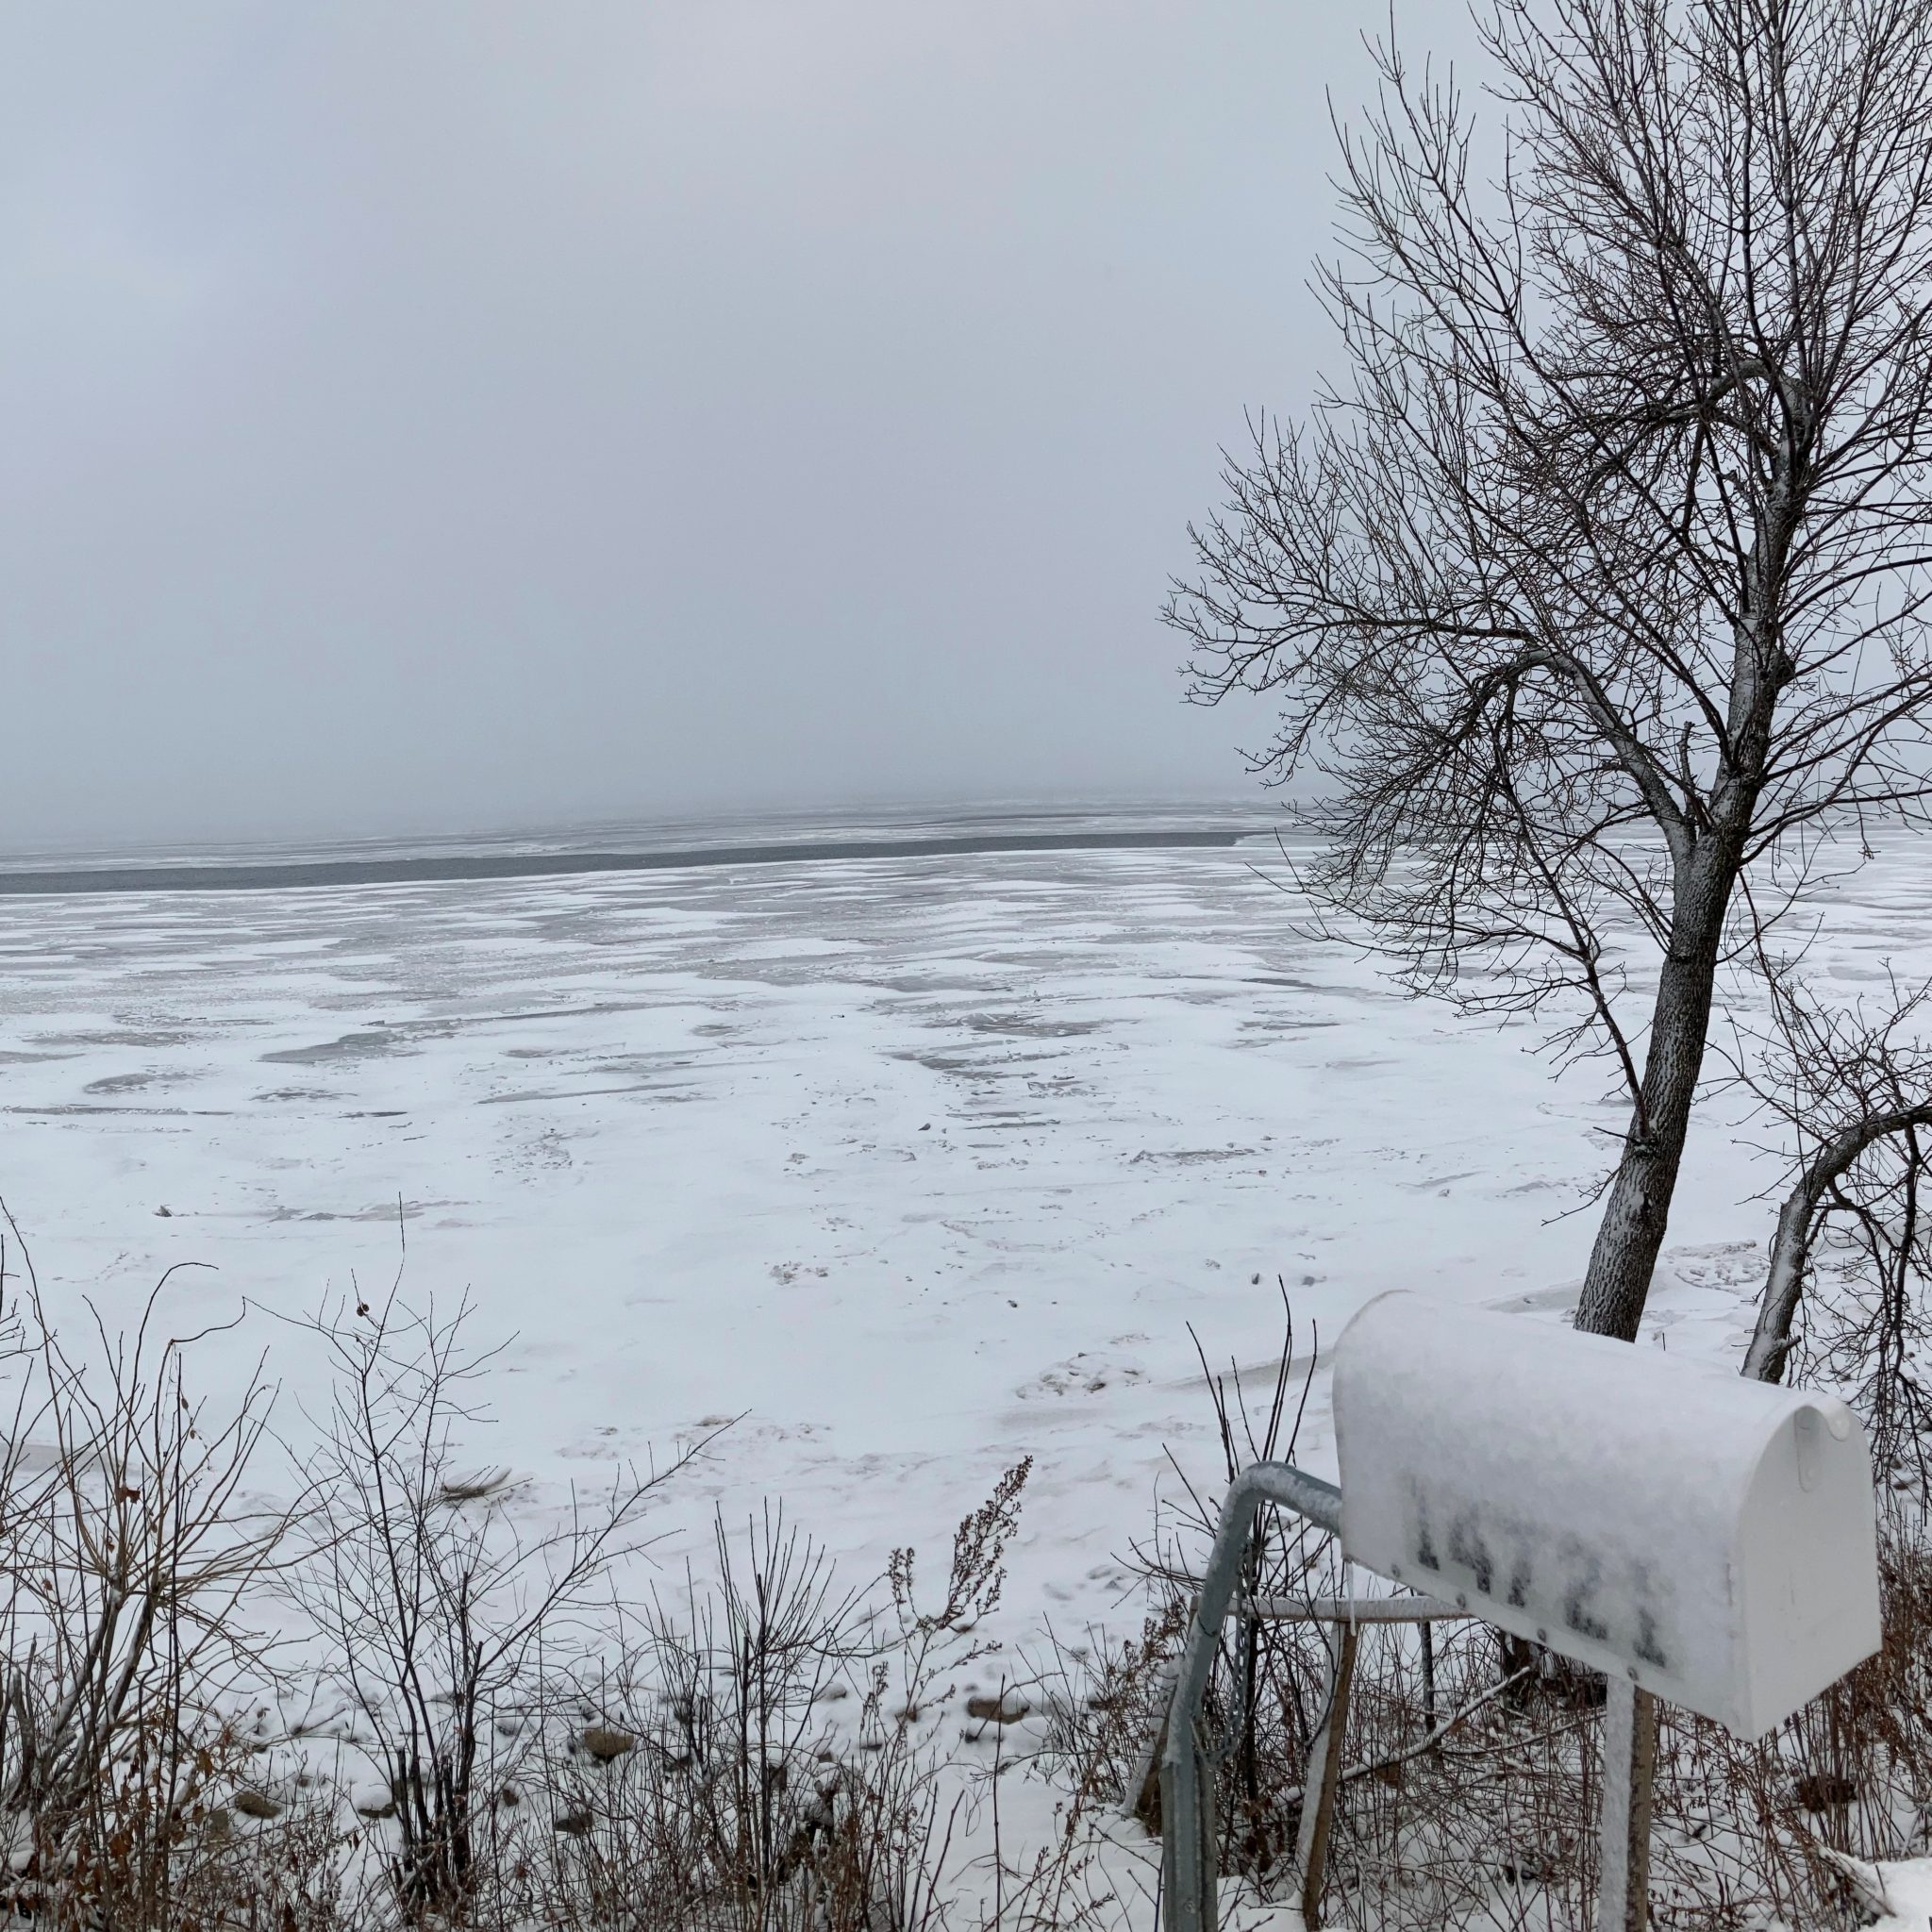 Open Water on Mille Lacs Lake